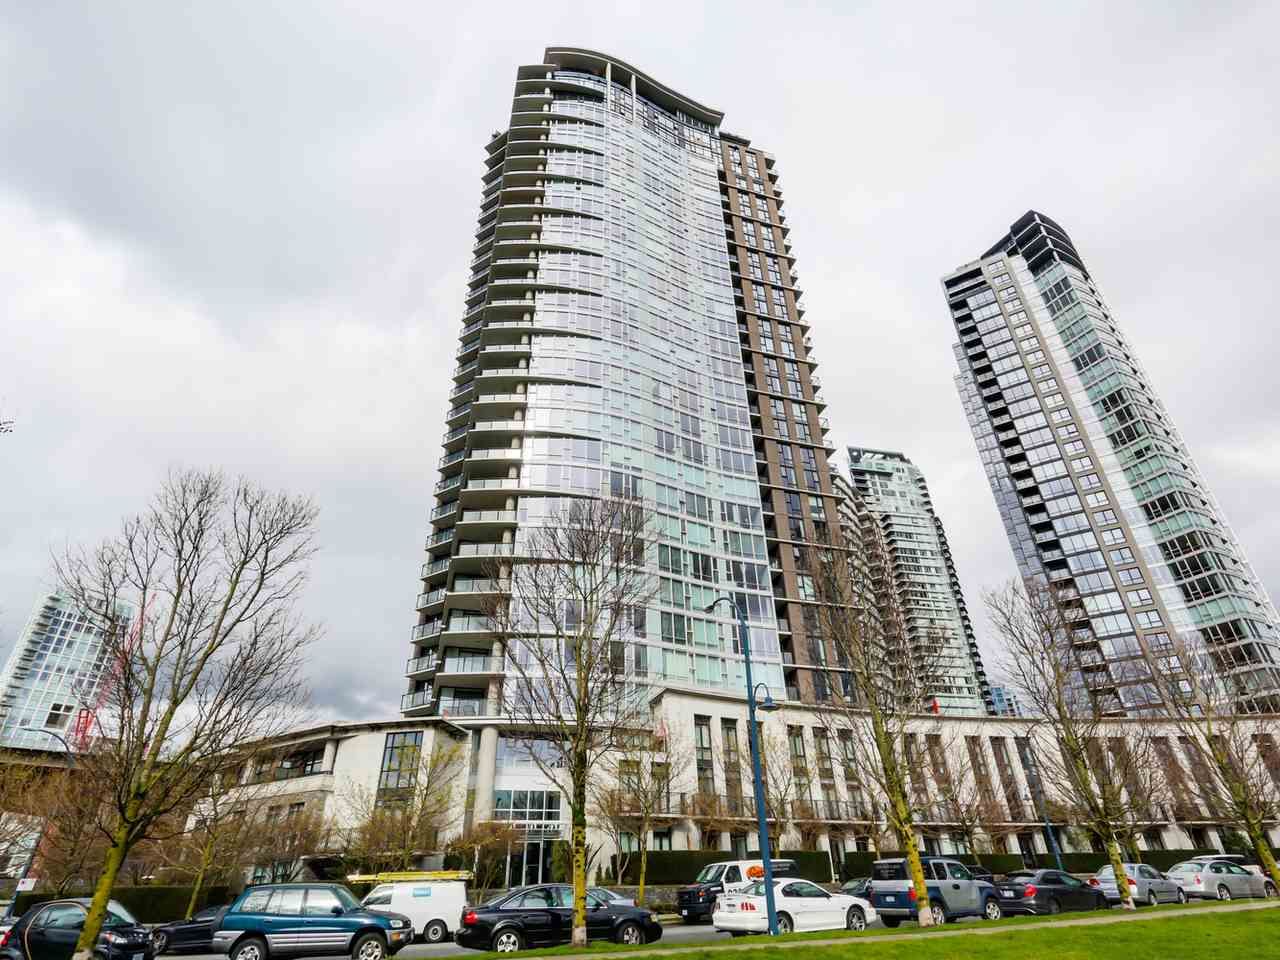 Main Photo: 3002 583 BEACH CRESCENT in Vancouver: Yaletown Condo for sale (Vancouver West)  : MLS®# R2043293